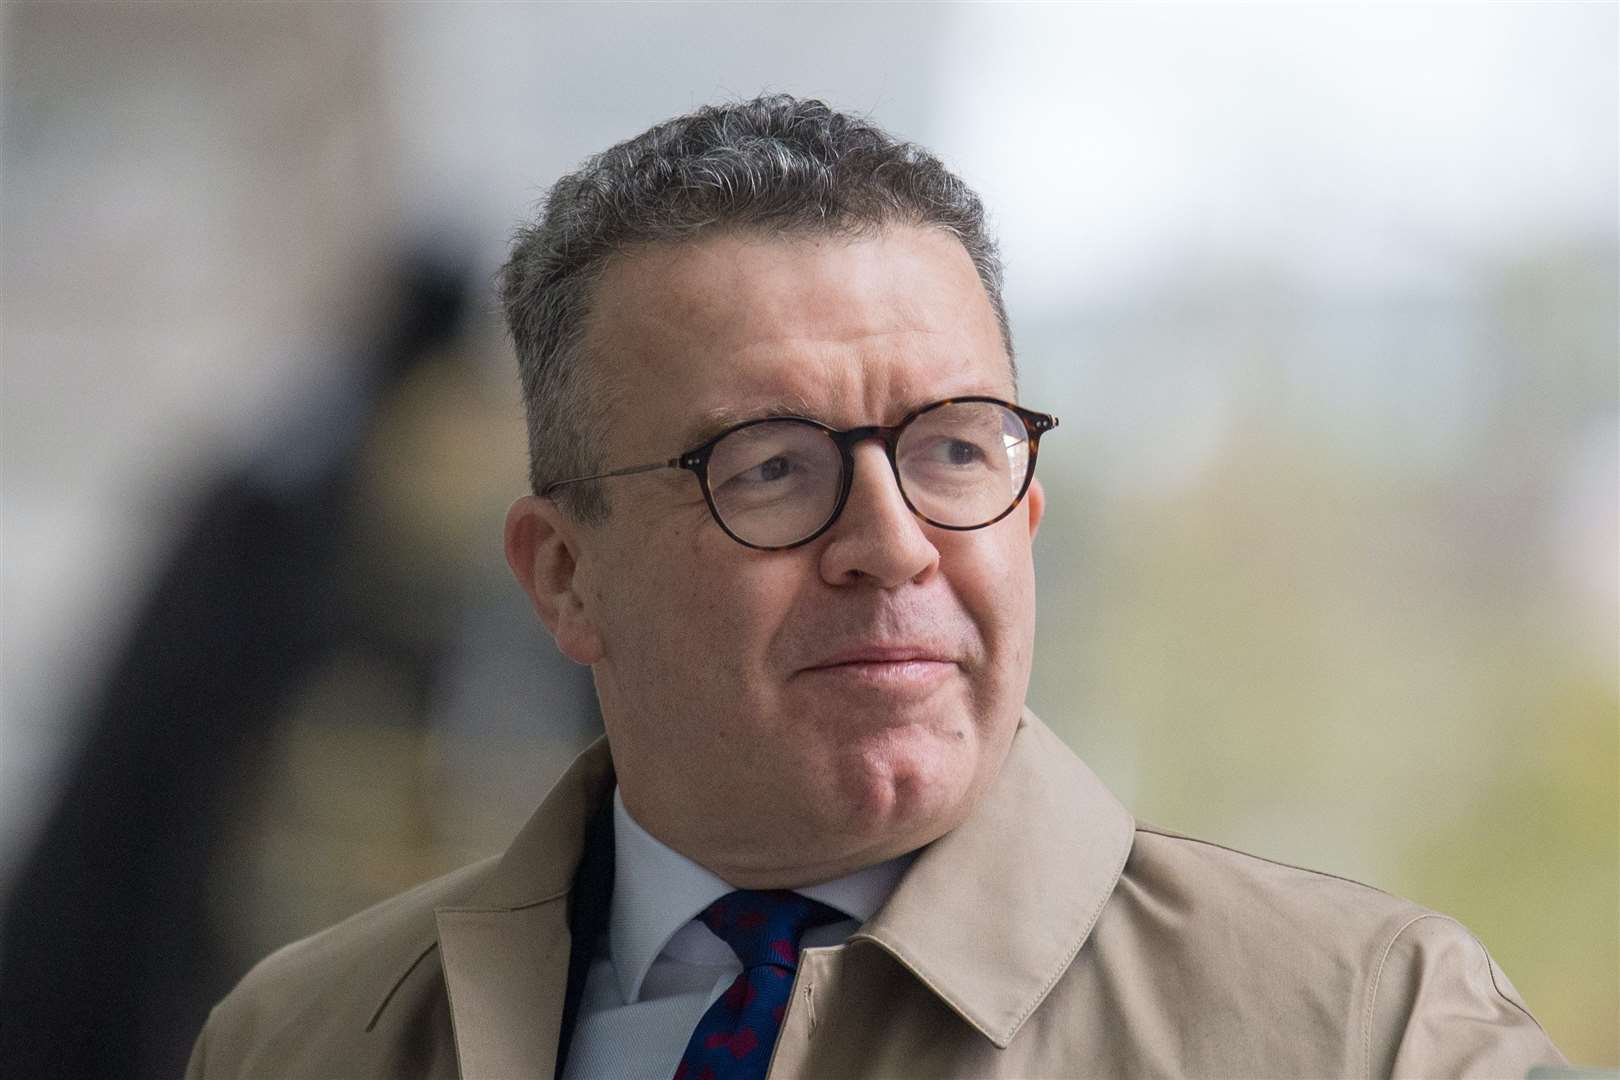 Peerage for ex-deputy Labour leader Tom Watson blocked – reports